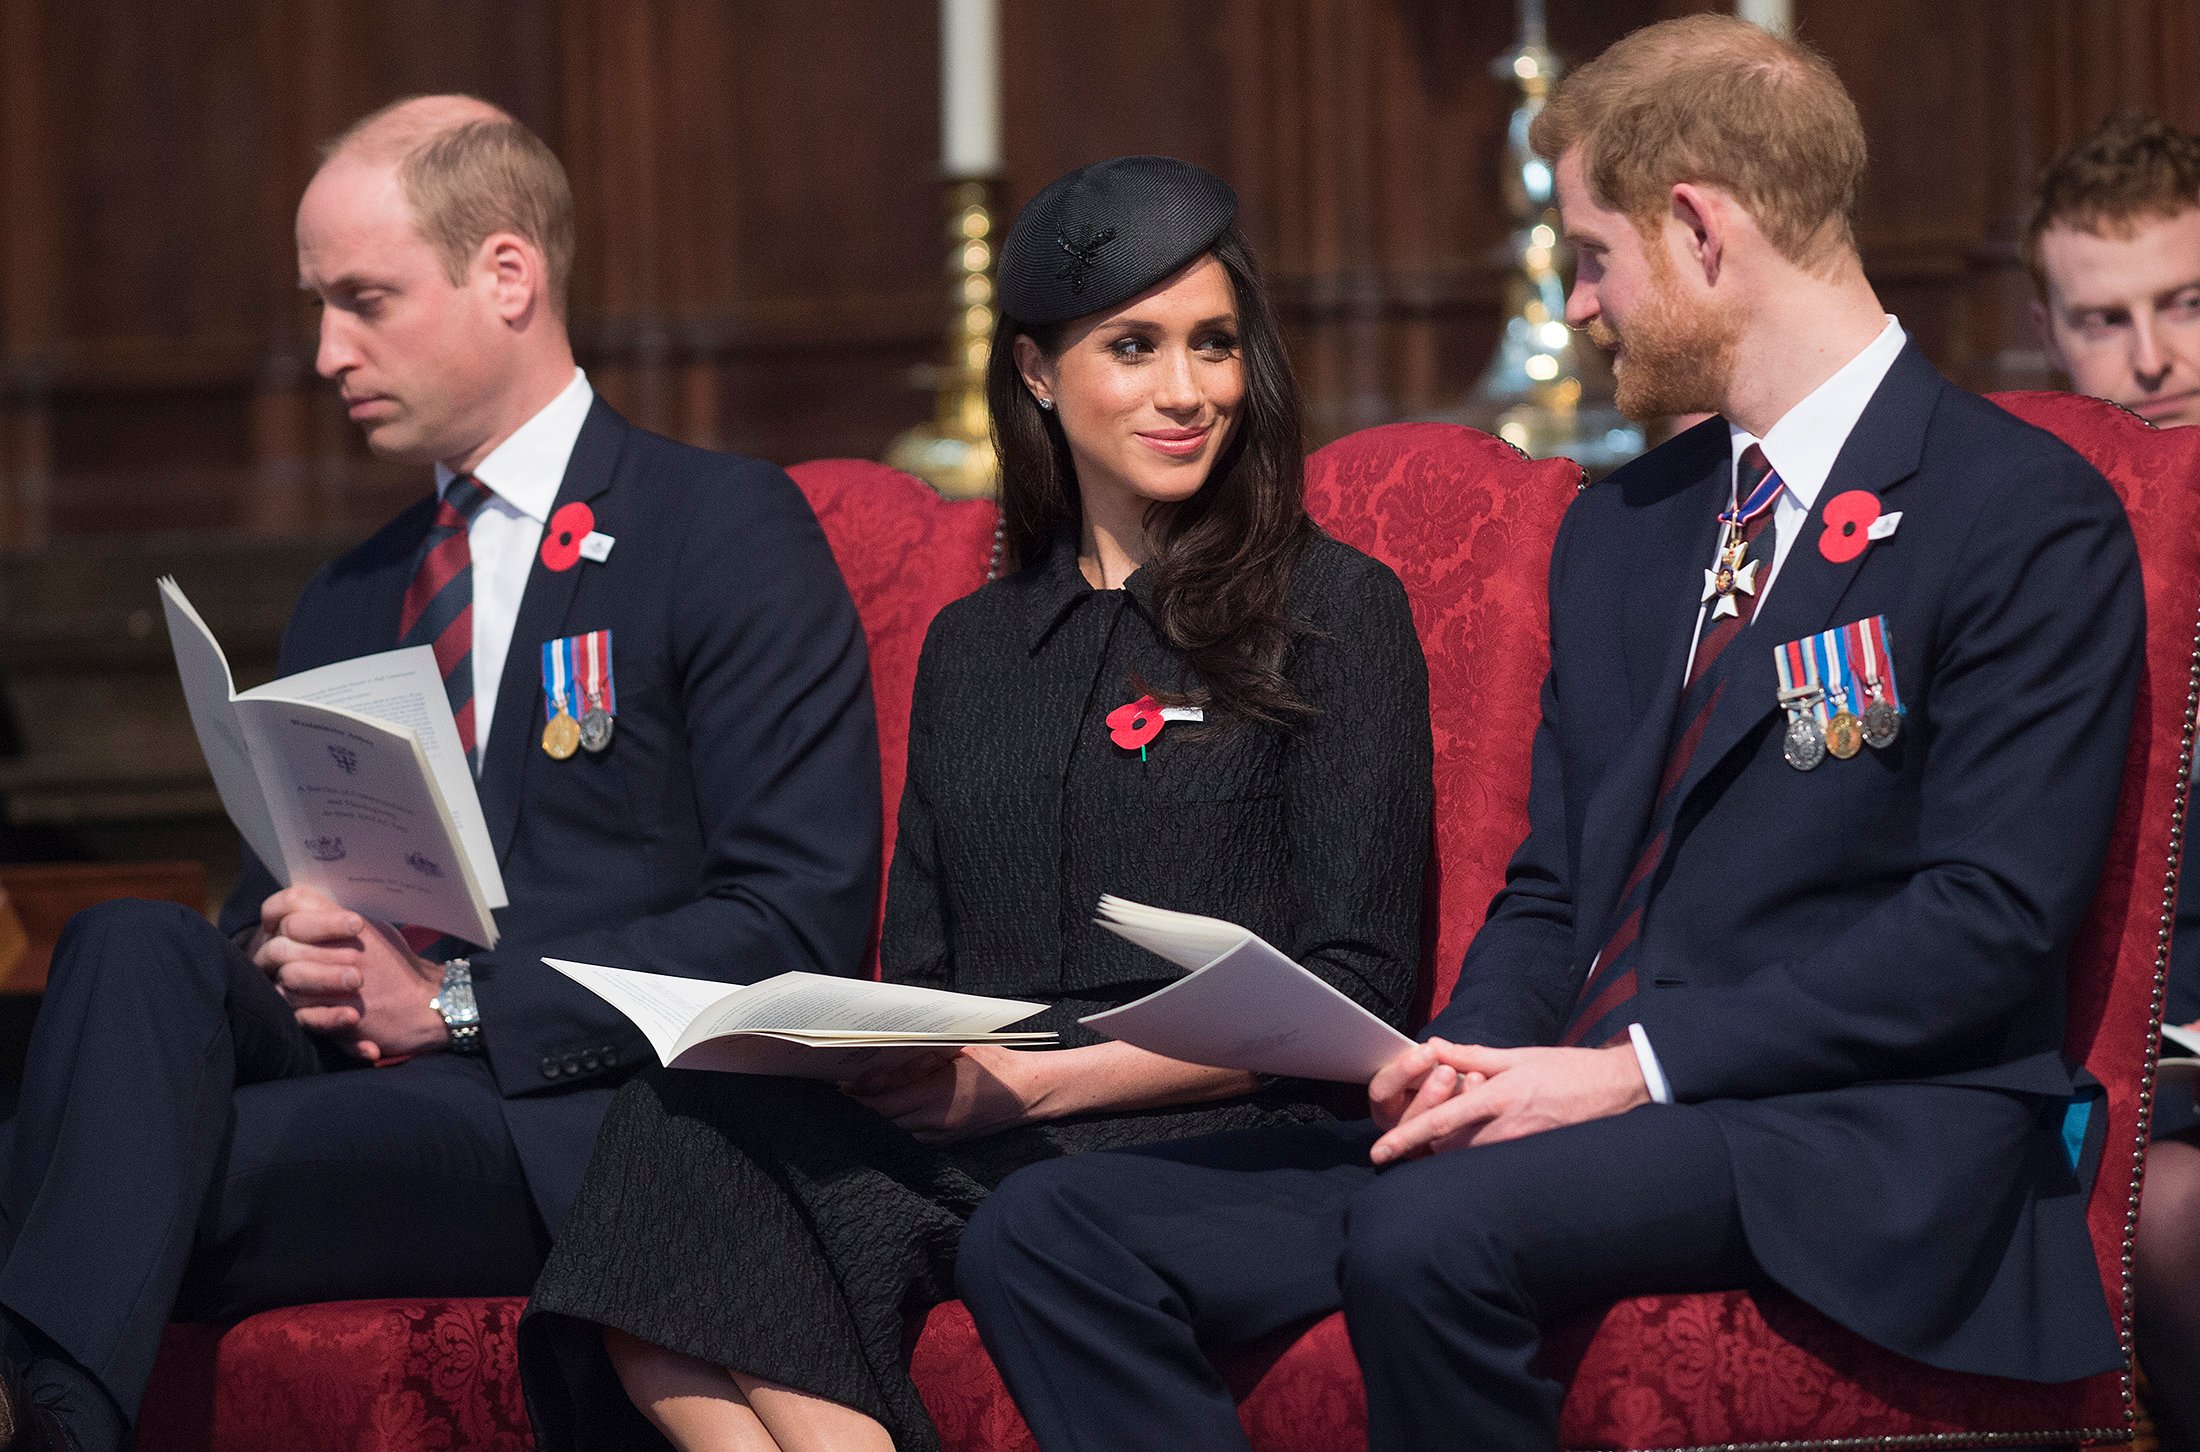 Prince William sitting with Meghan Markle and Prince Harry who are smiling at each other during Anzac Day service